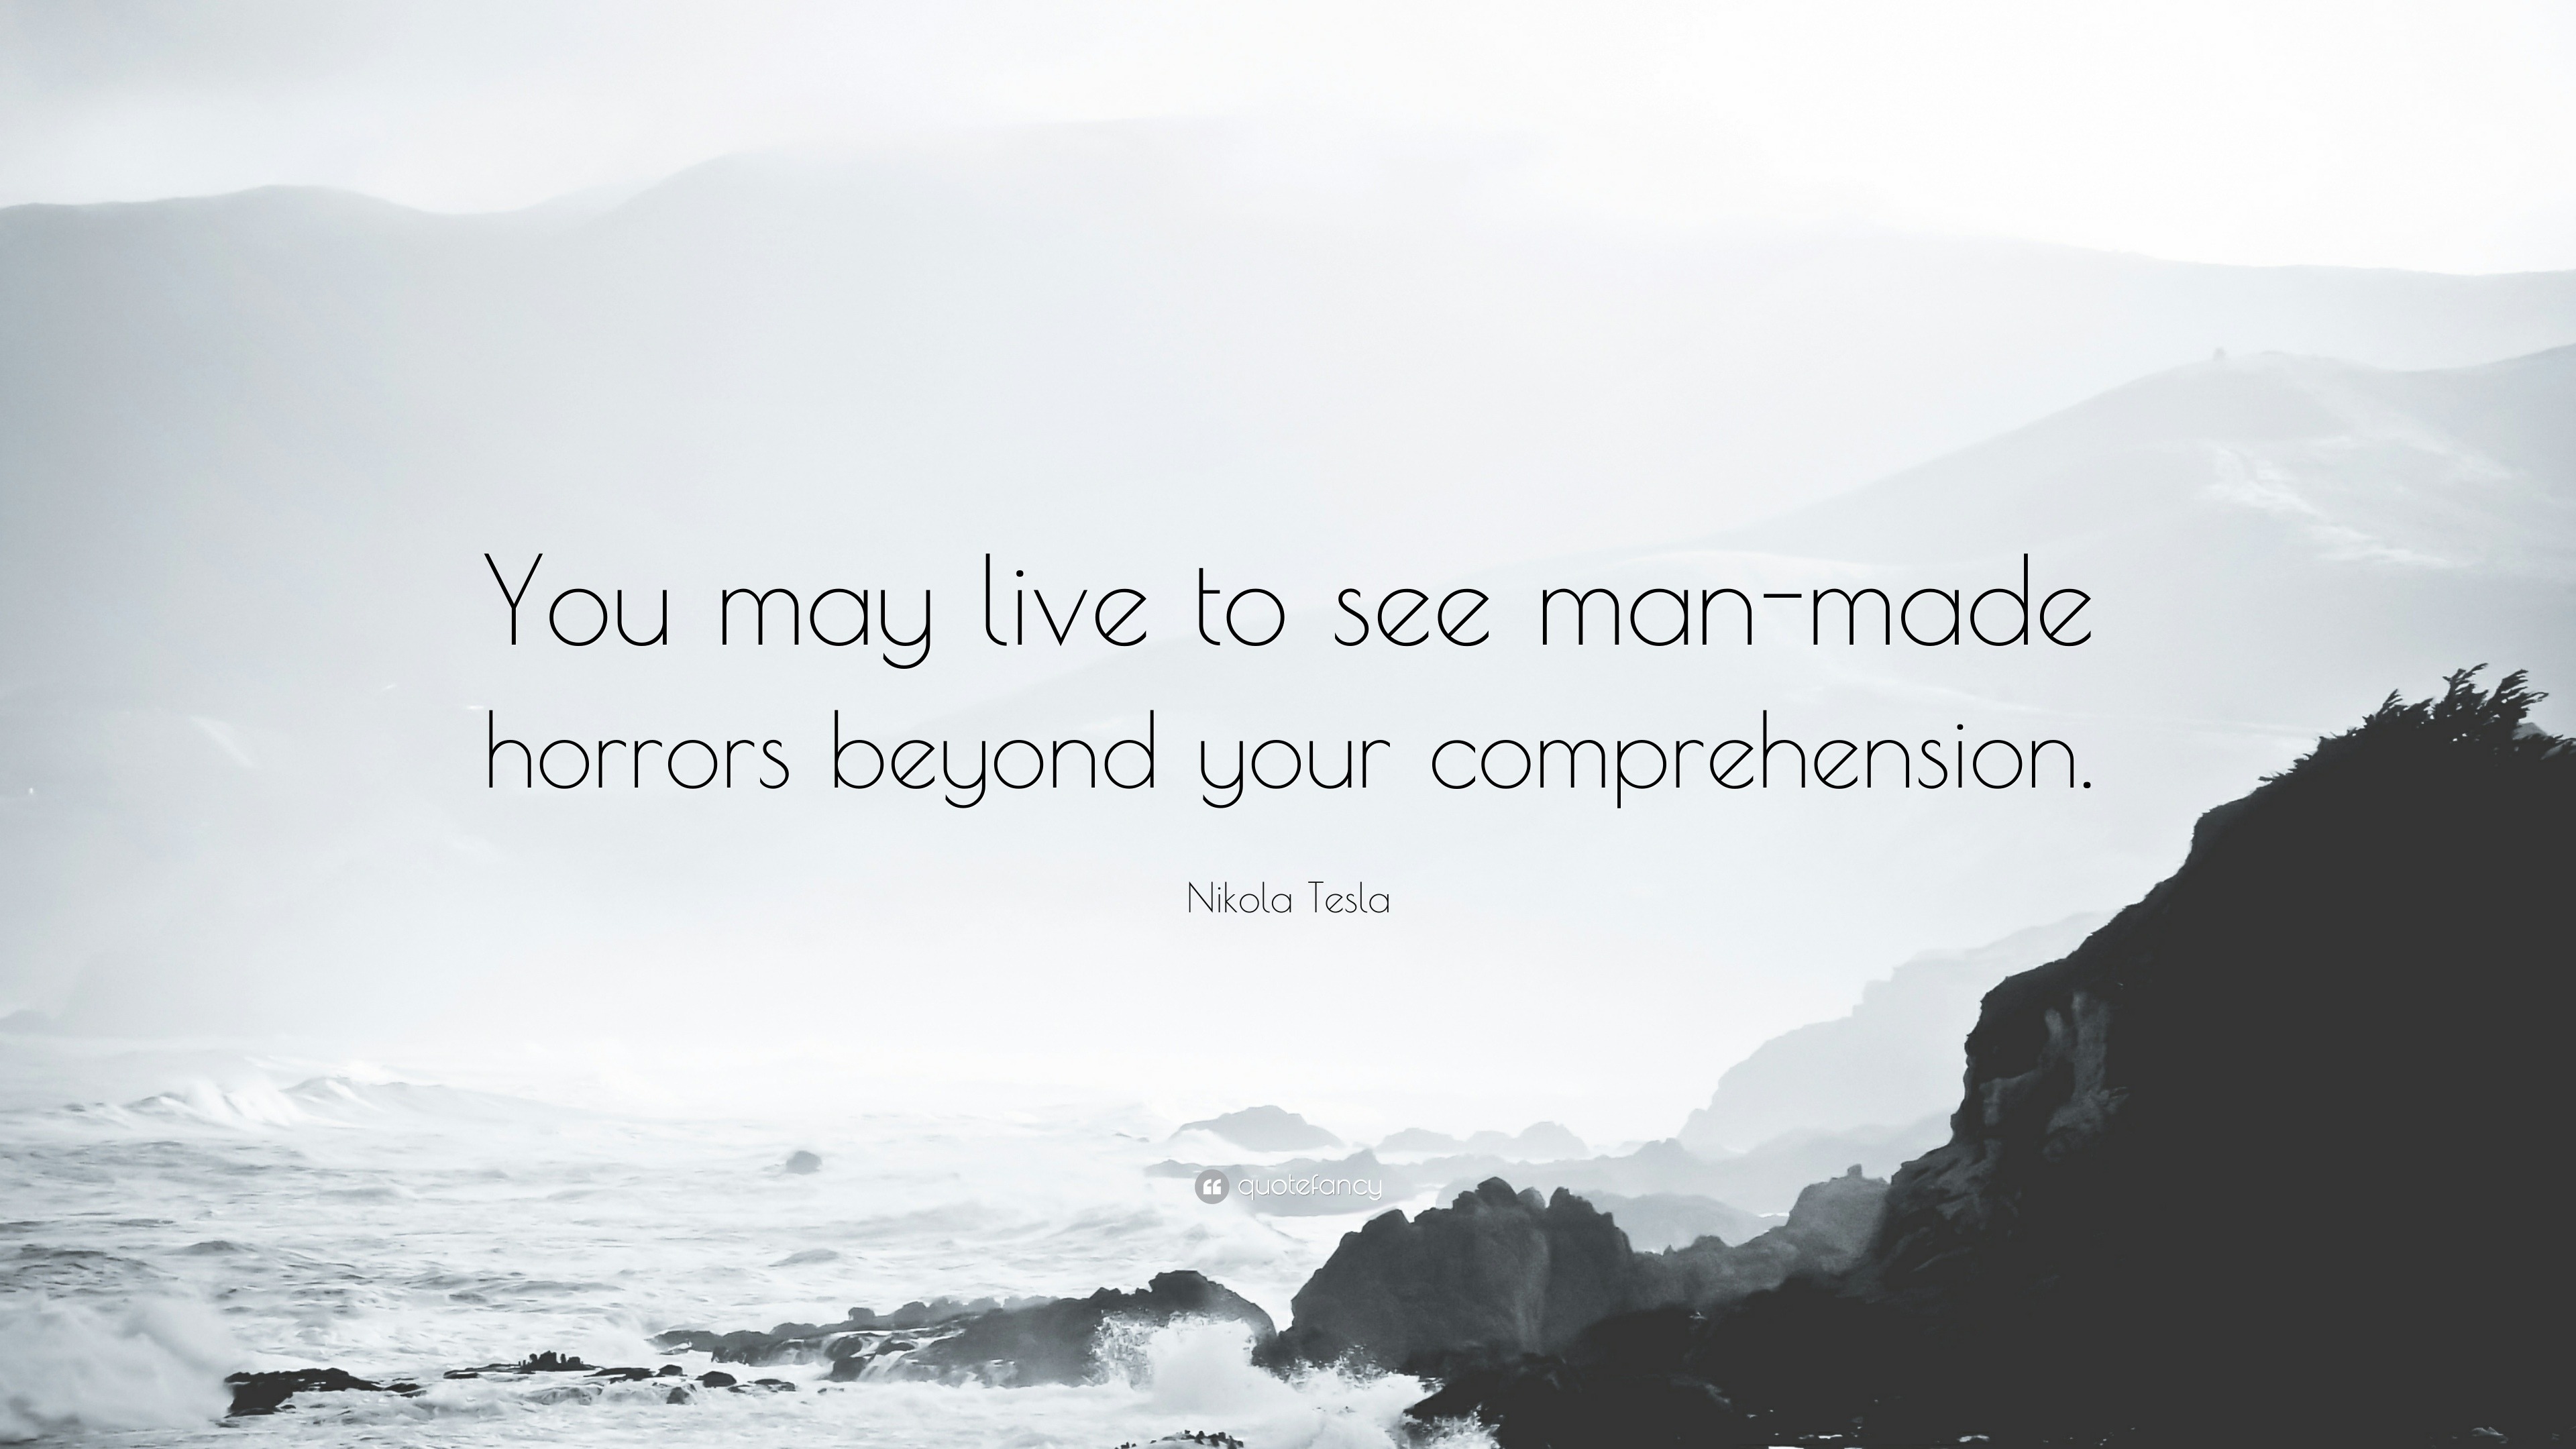 https://quotefancy.com/media/wallpaper/3840x2160/172377-Nikola-Tesla-Quote-You-may-live-to-see-man-made-horrors-beyond.jpg